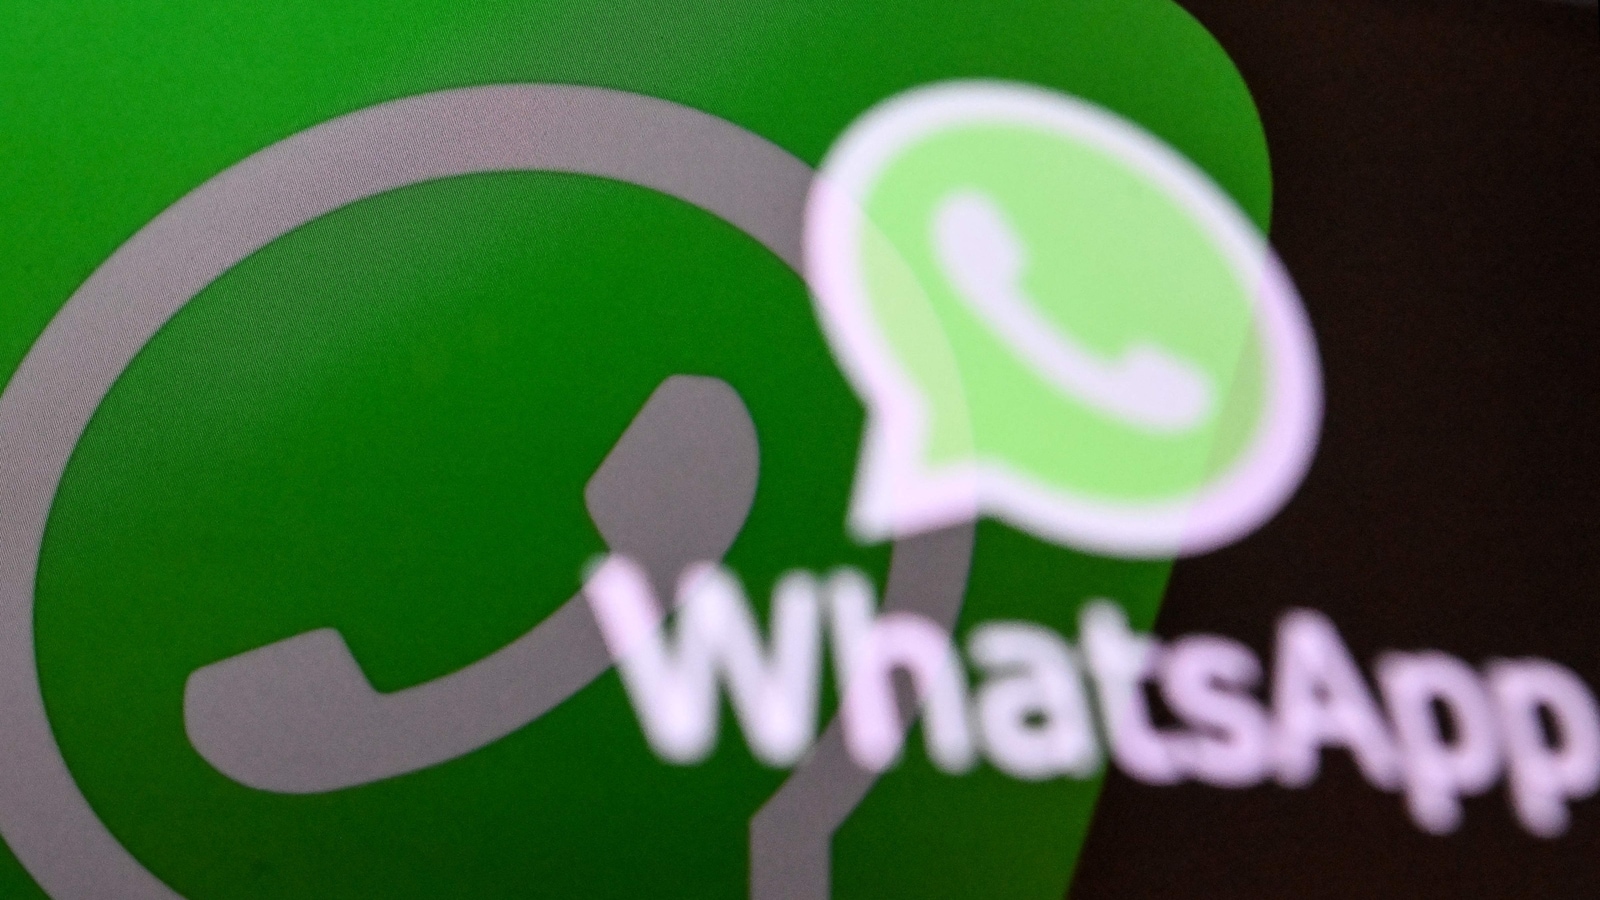 WhatsApp launches ‘Global Security Centre’ to Protect users from scams and frauds